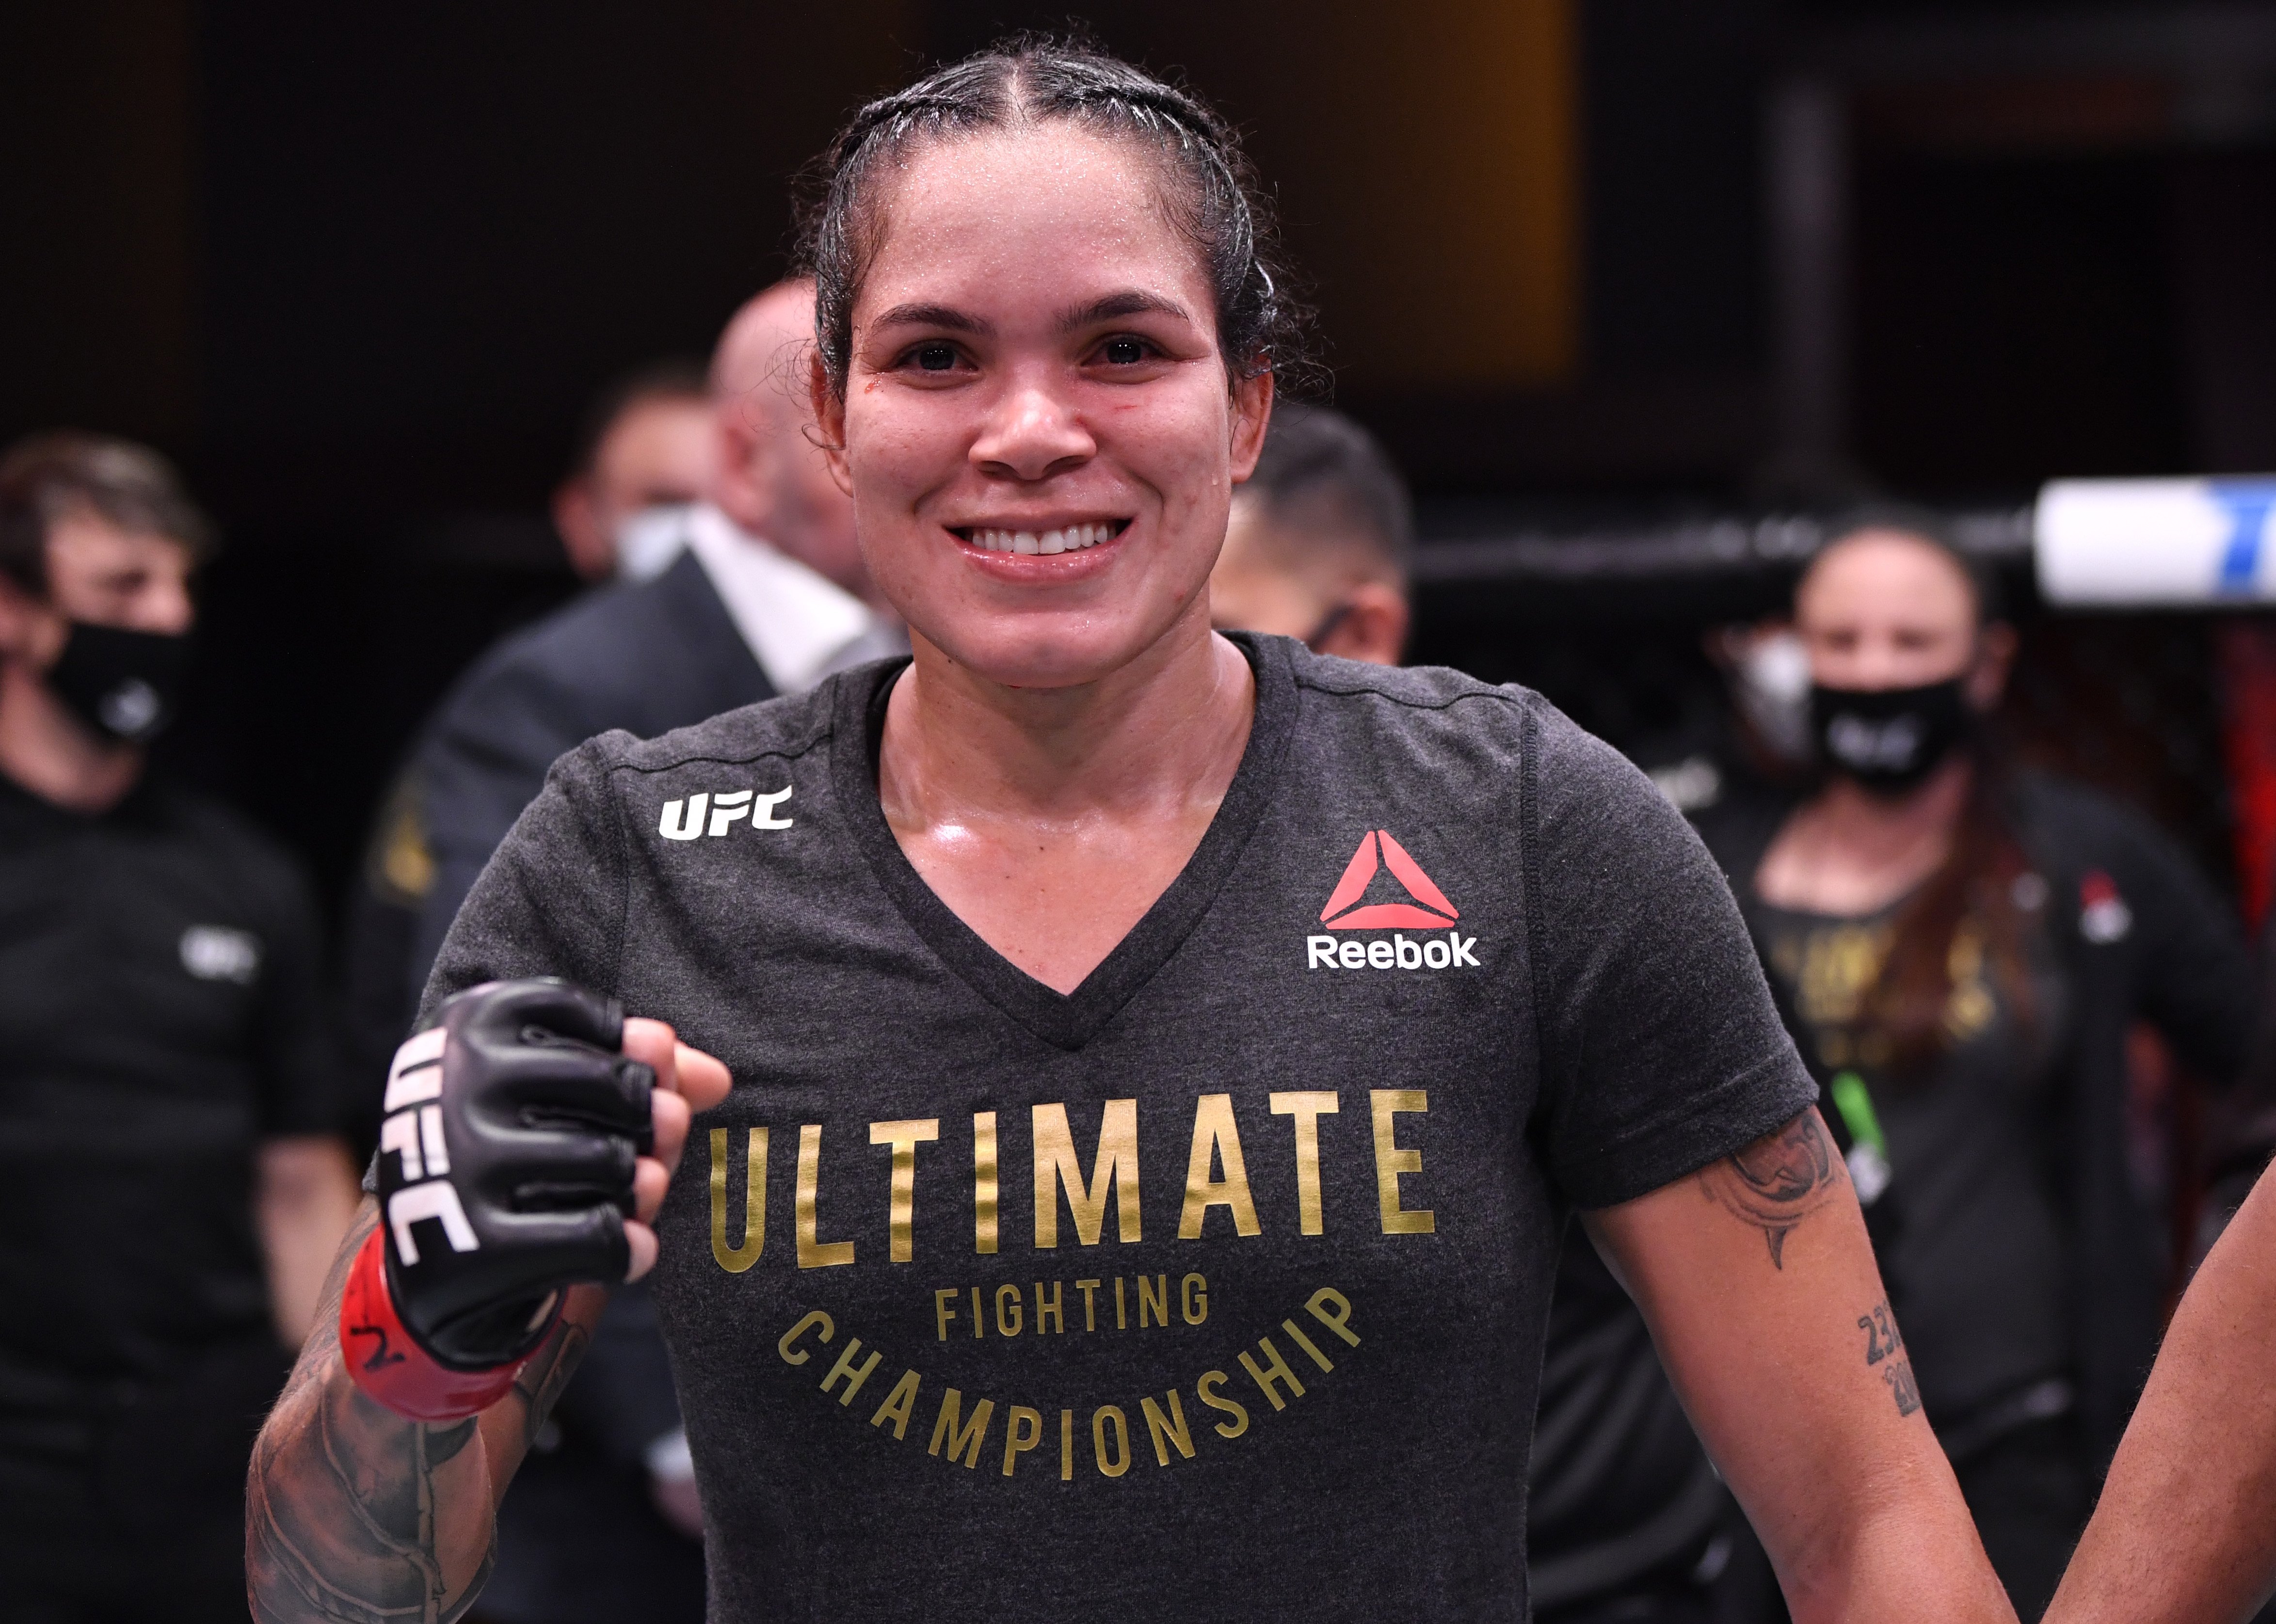 Amanda Nunes celebrates her victory in the UFC featherweight championship tournament during the UFC 250 event on June 06, 2020, in Las Vegas, Nevada | Photo: Jeff Bottari/Zuffa LLC/Getty Images